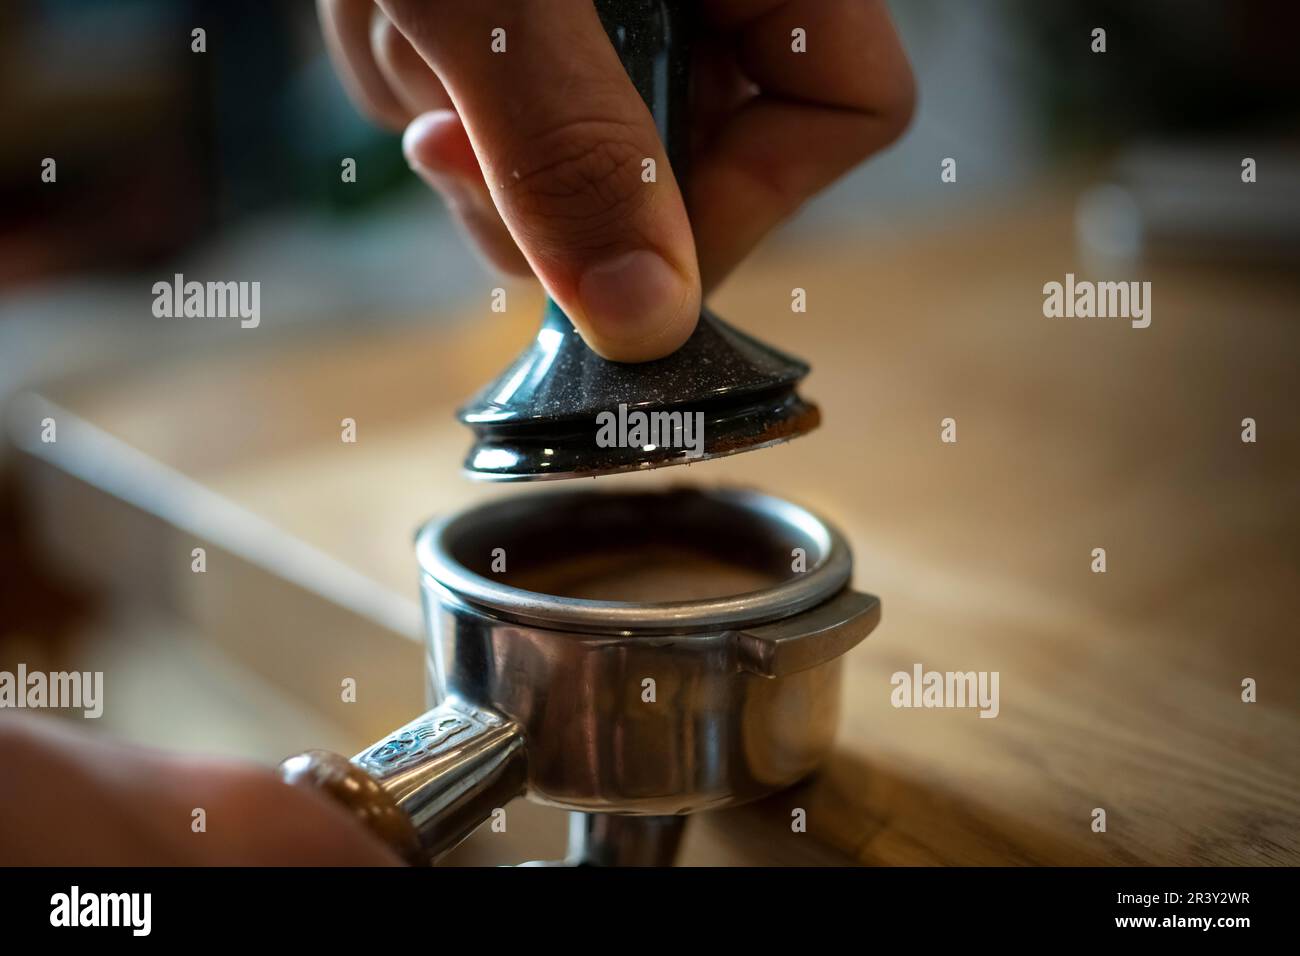 Coffee prep, the home Barista making Espresso using a Grinding Machine Coffee extraction and using the hopper, closer detail shots Stock Photo